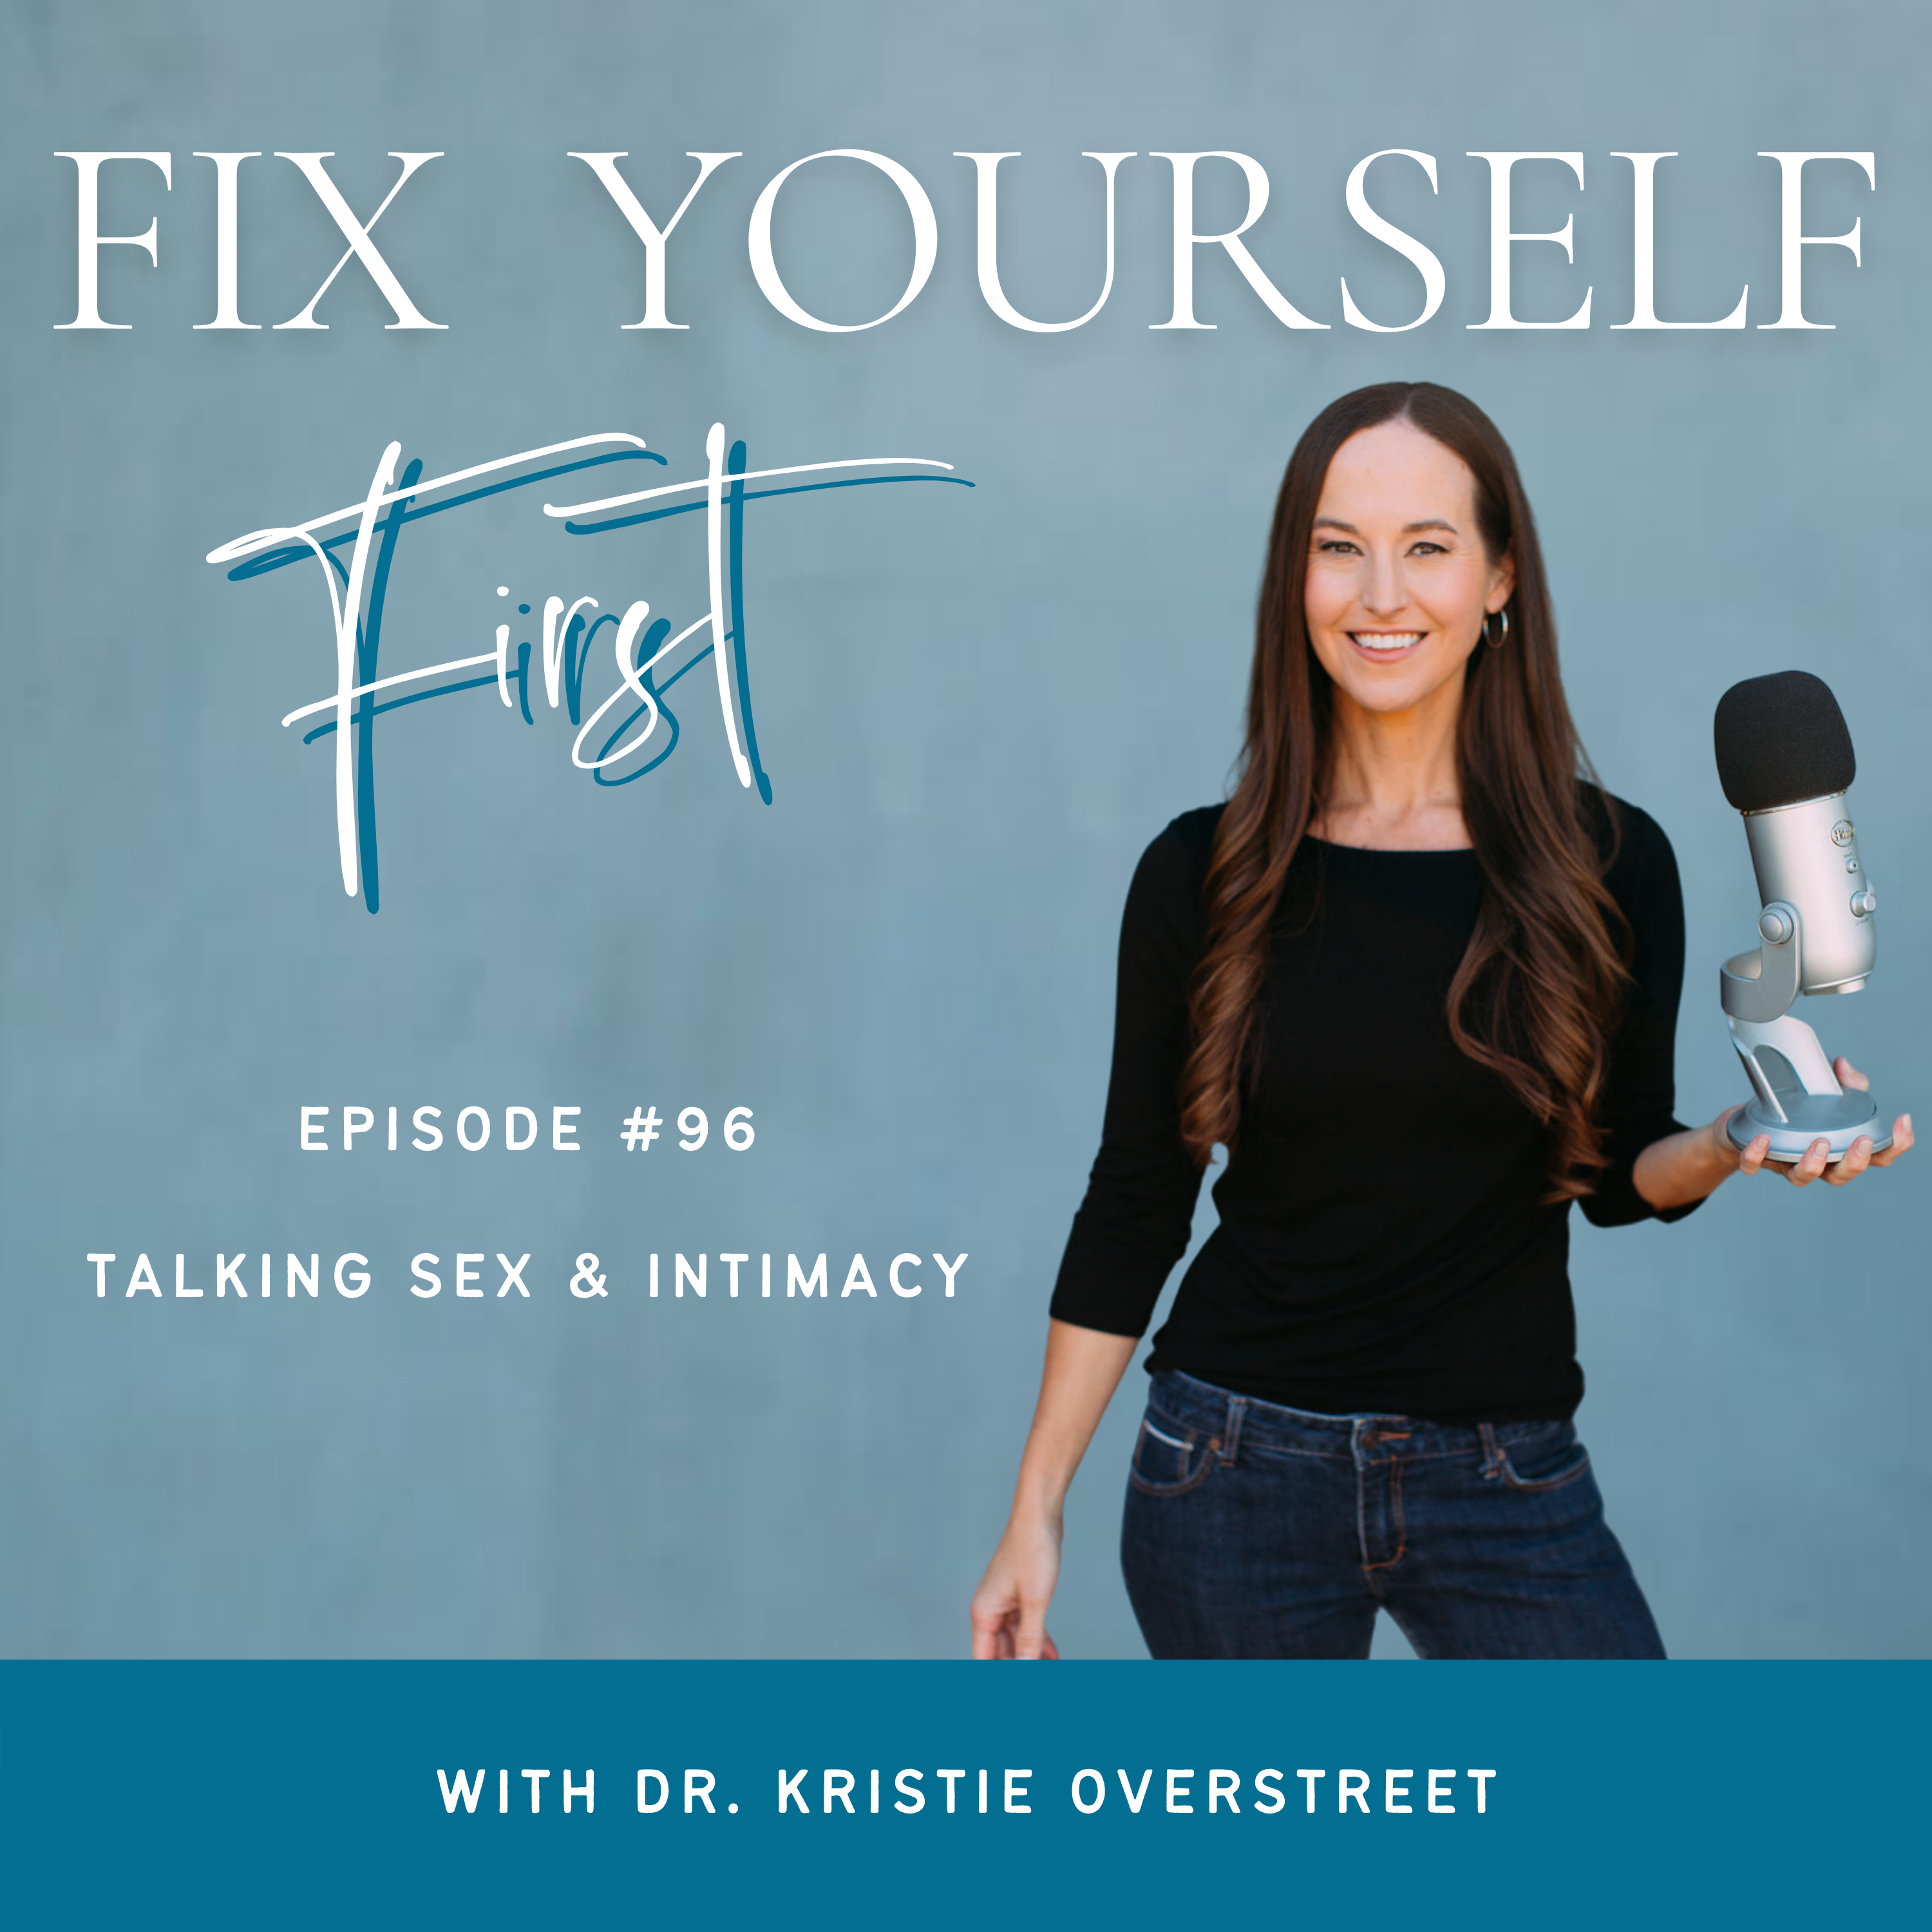 Fix Yourself First Episode 96 Talking Sex & Intimacy with Dr. Kristie